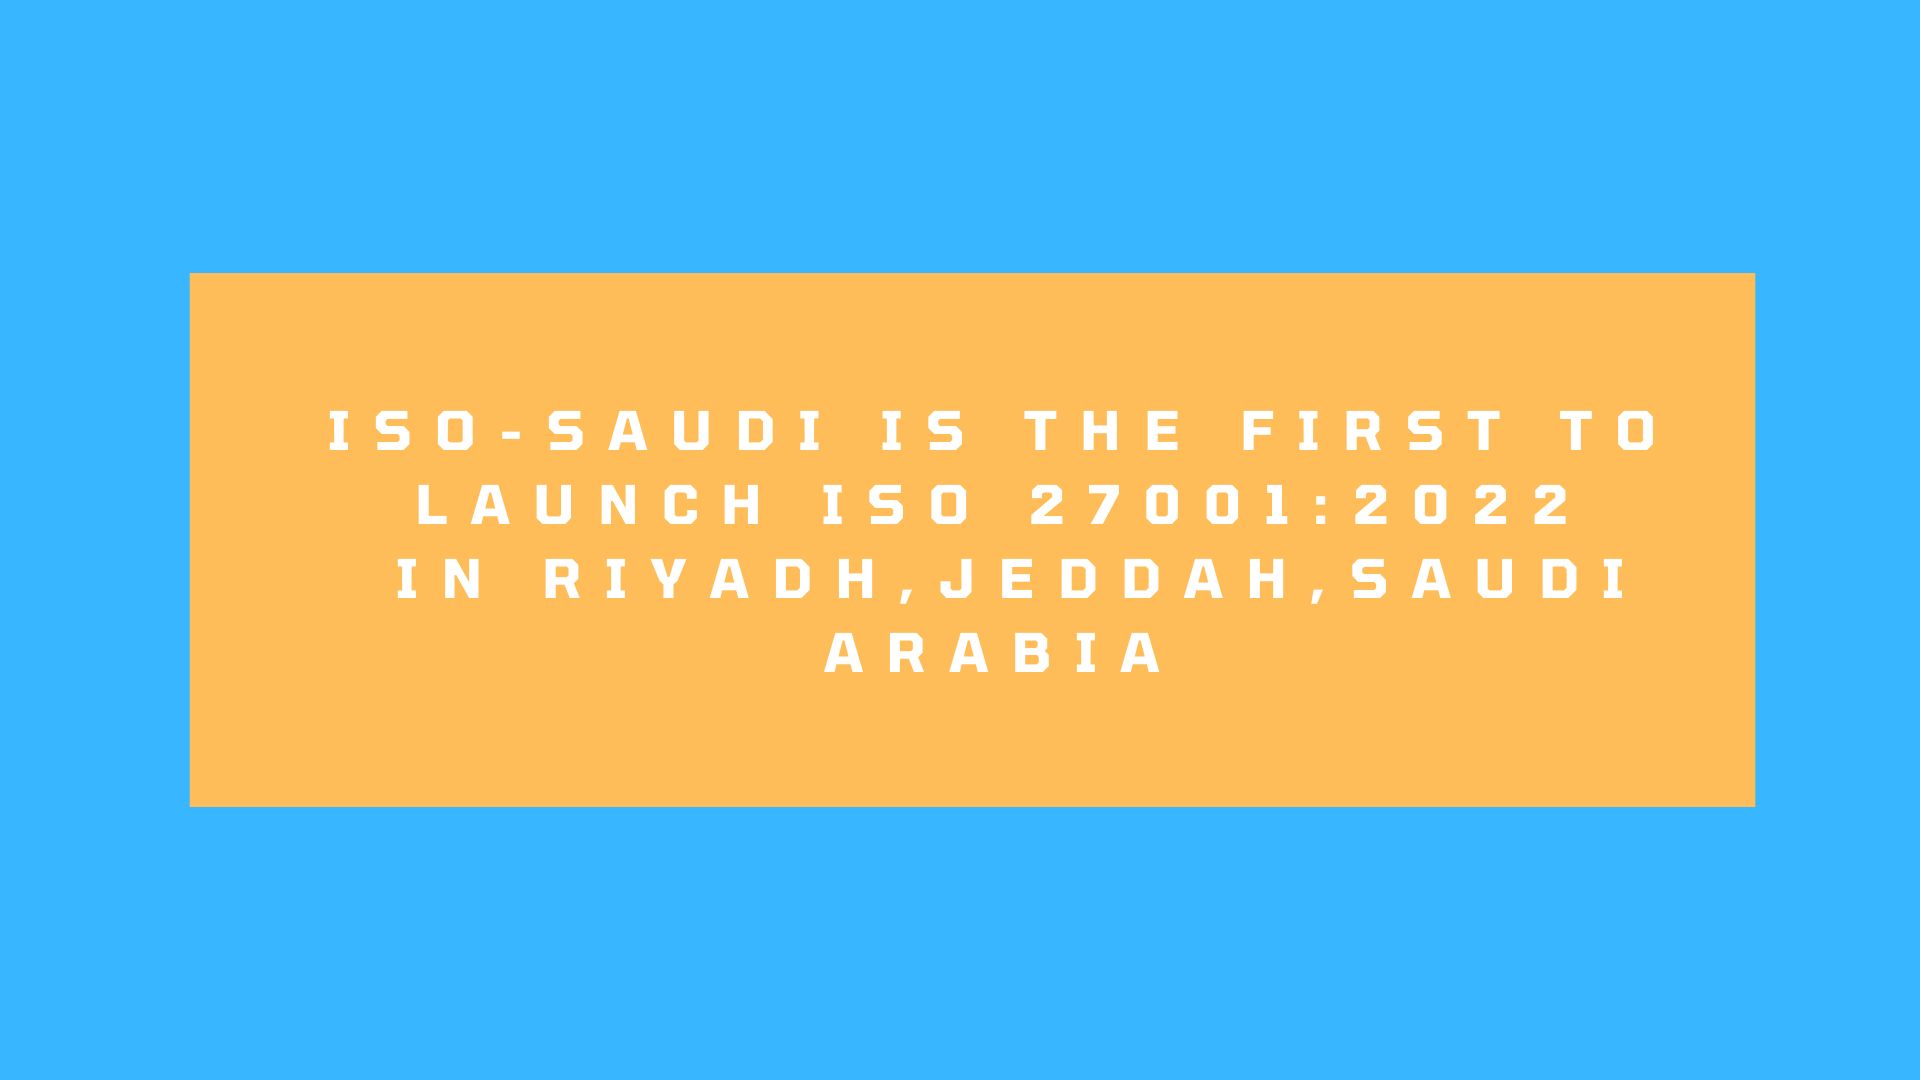 iso saudi is the first to lauch iso 270012022 in saudi arabia